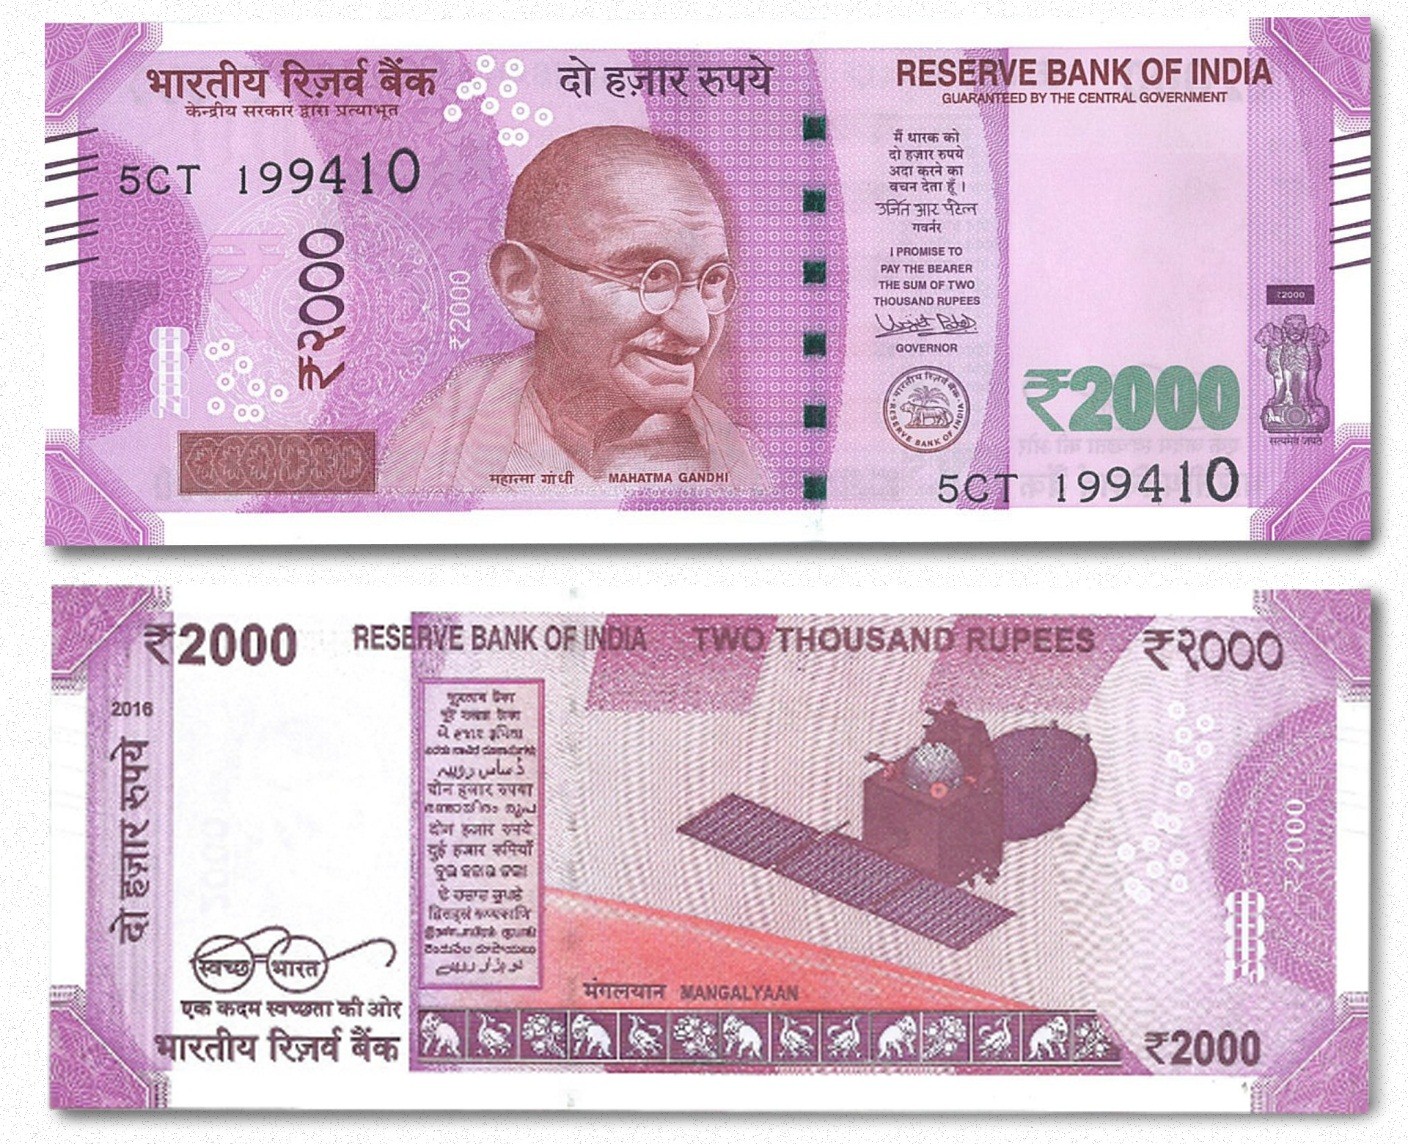 India's New Currency Design An Analysis of the New Currency in India